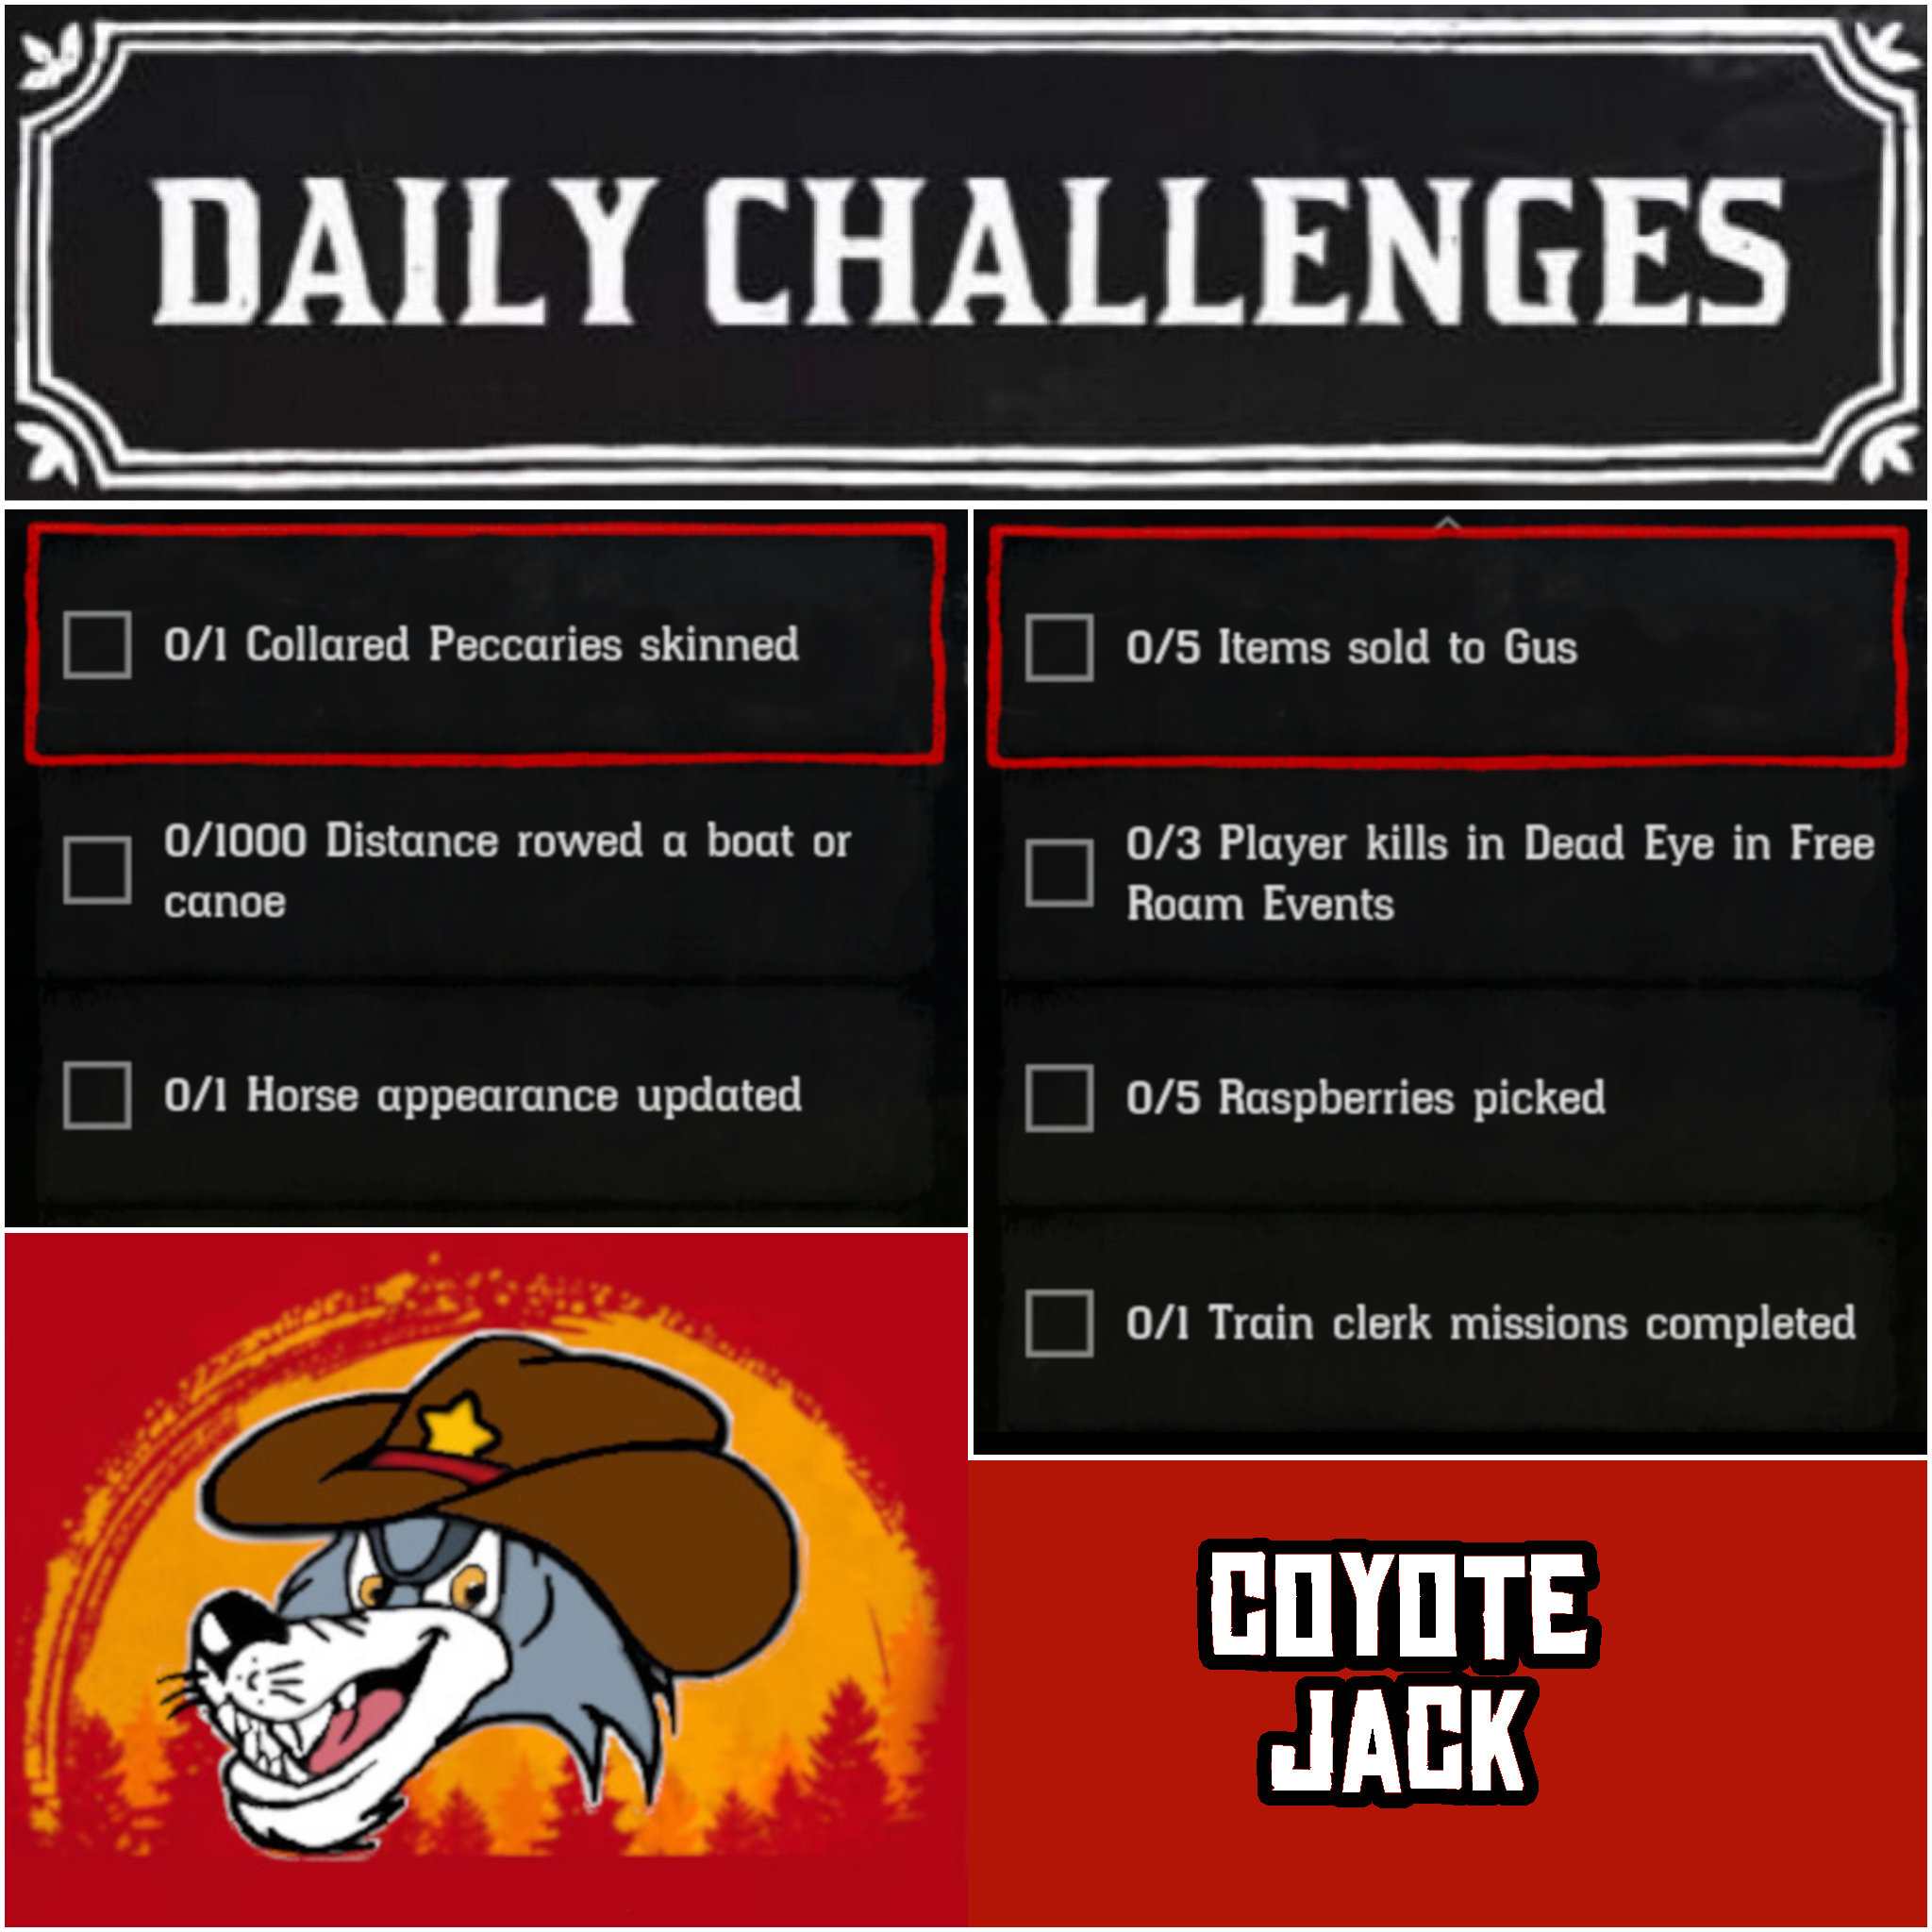 You are currently viewing Thursday 03 December Daily Challenges